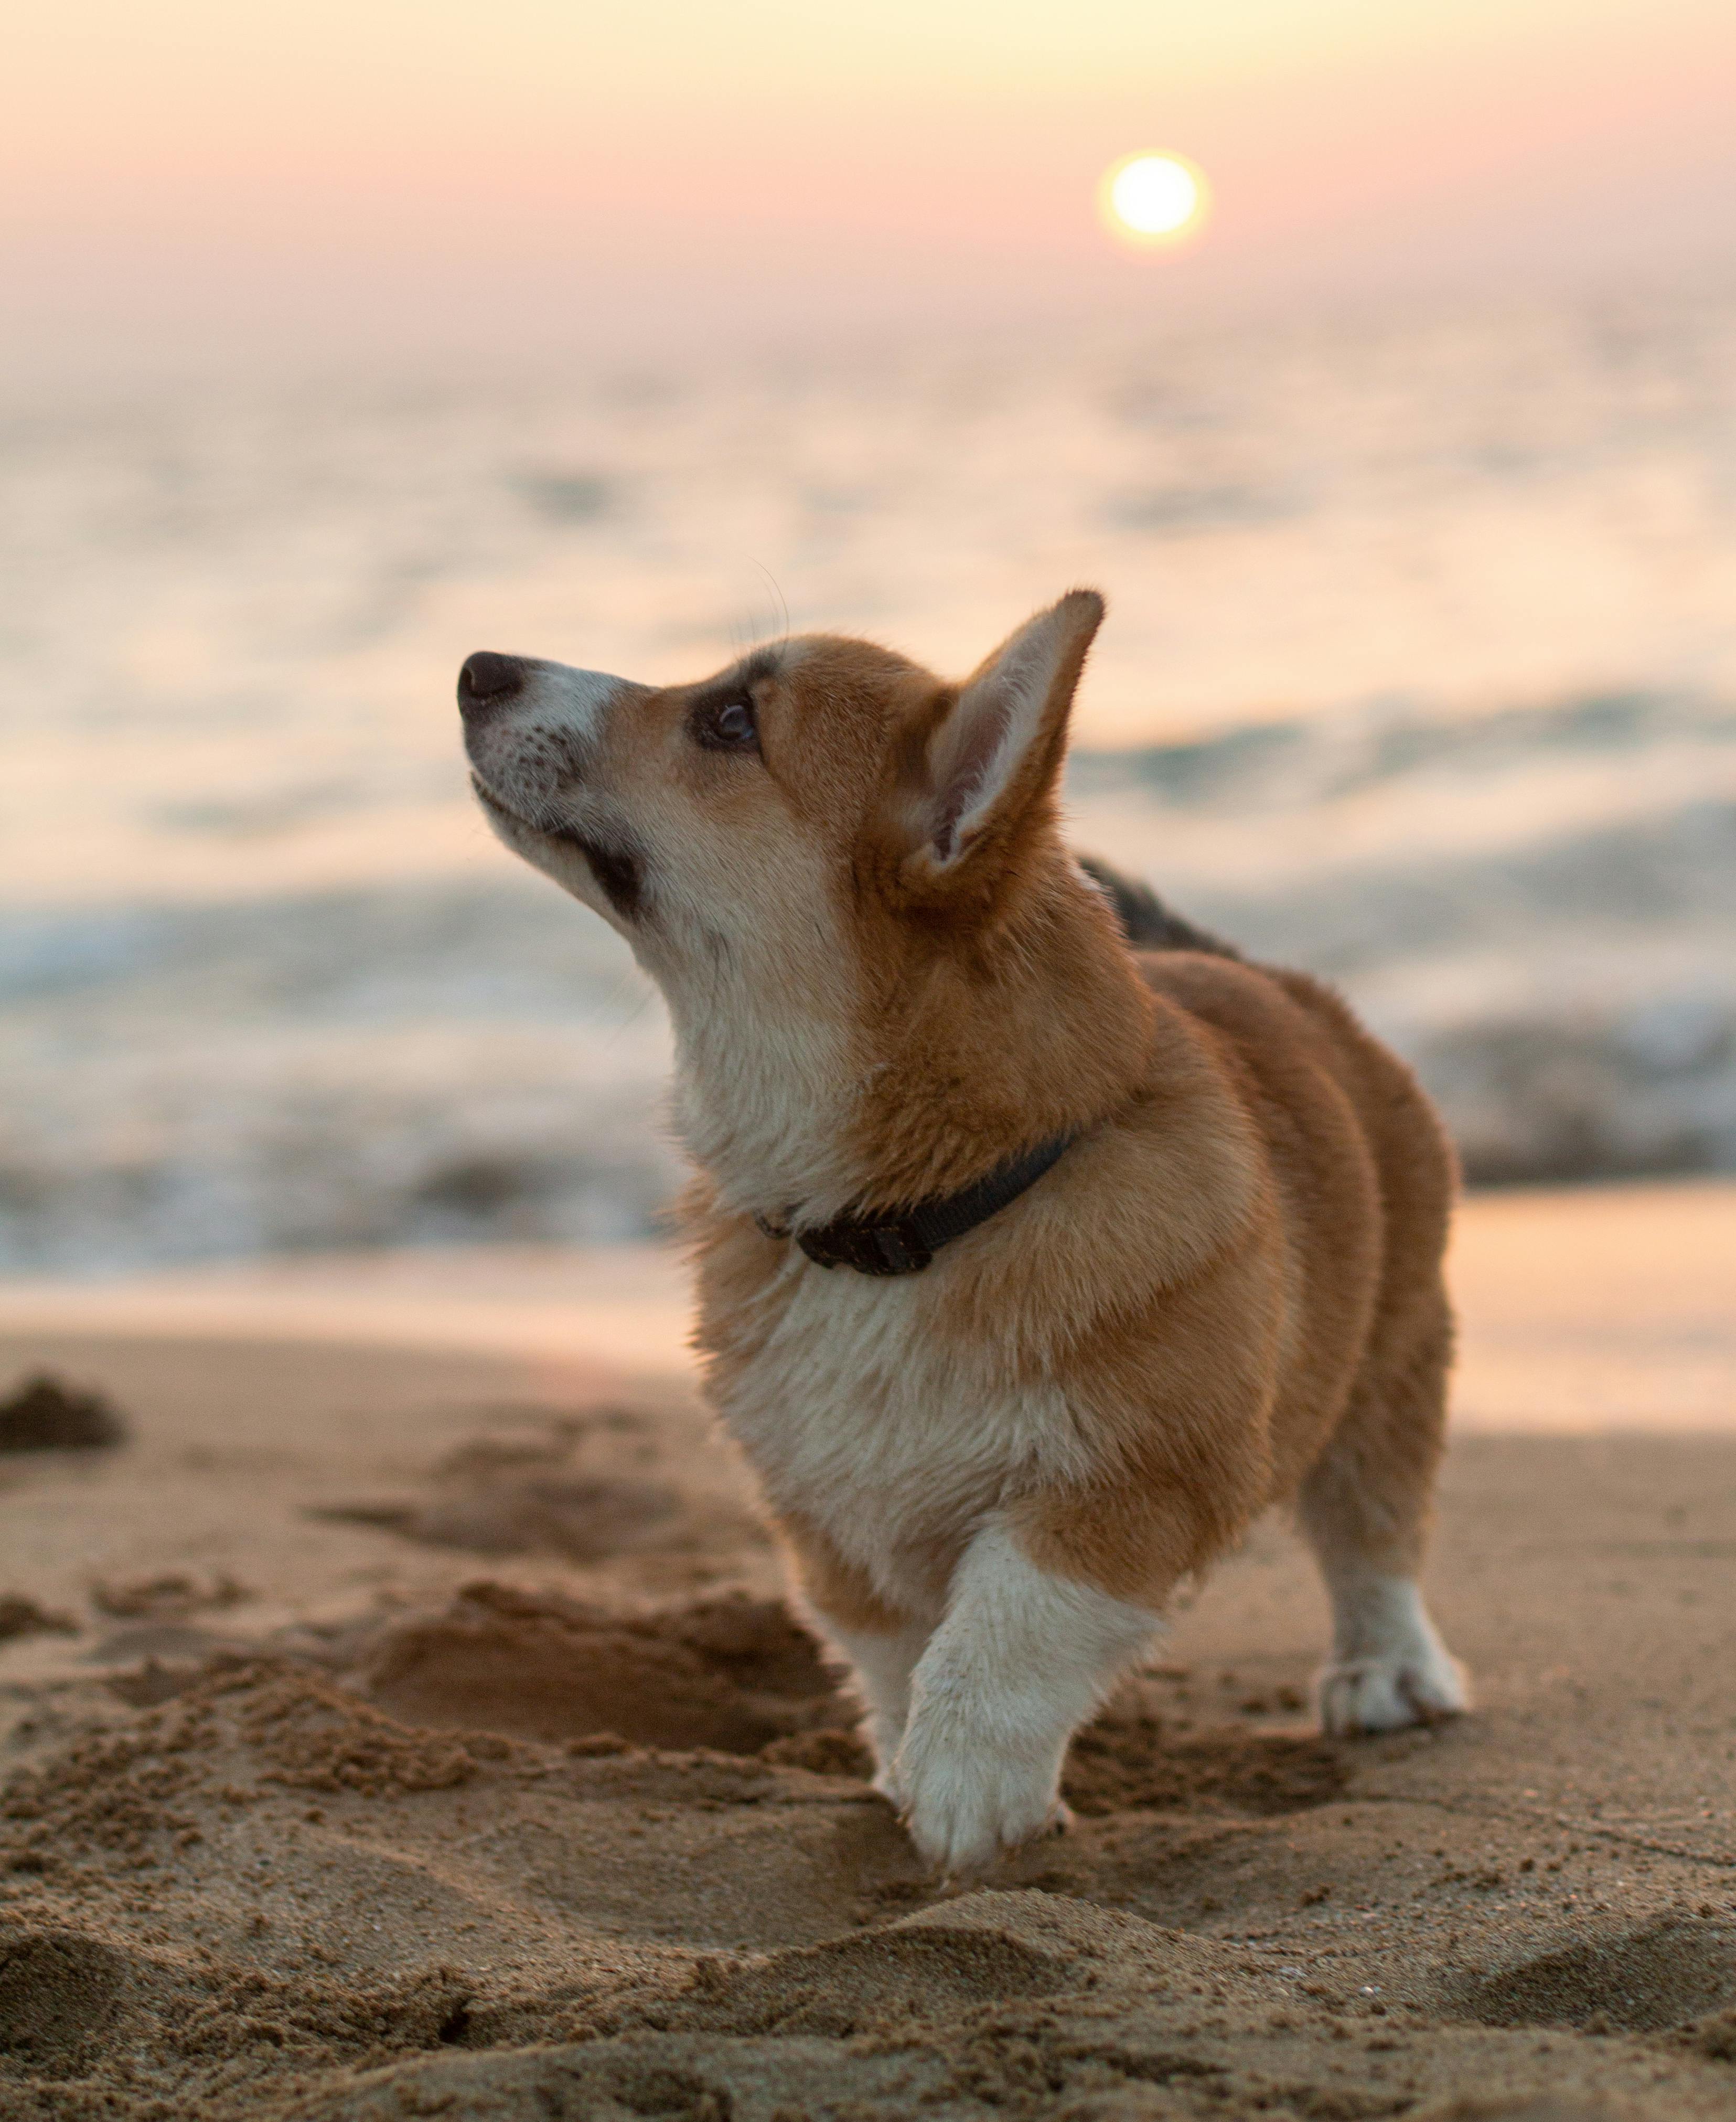 Download wallpaper 938x1668 welsh corgi dog muzzle iphone 876s6 for  parallax hd background